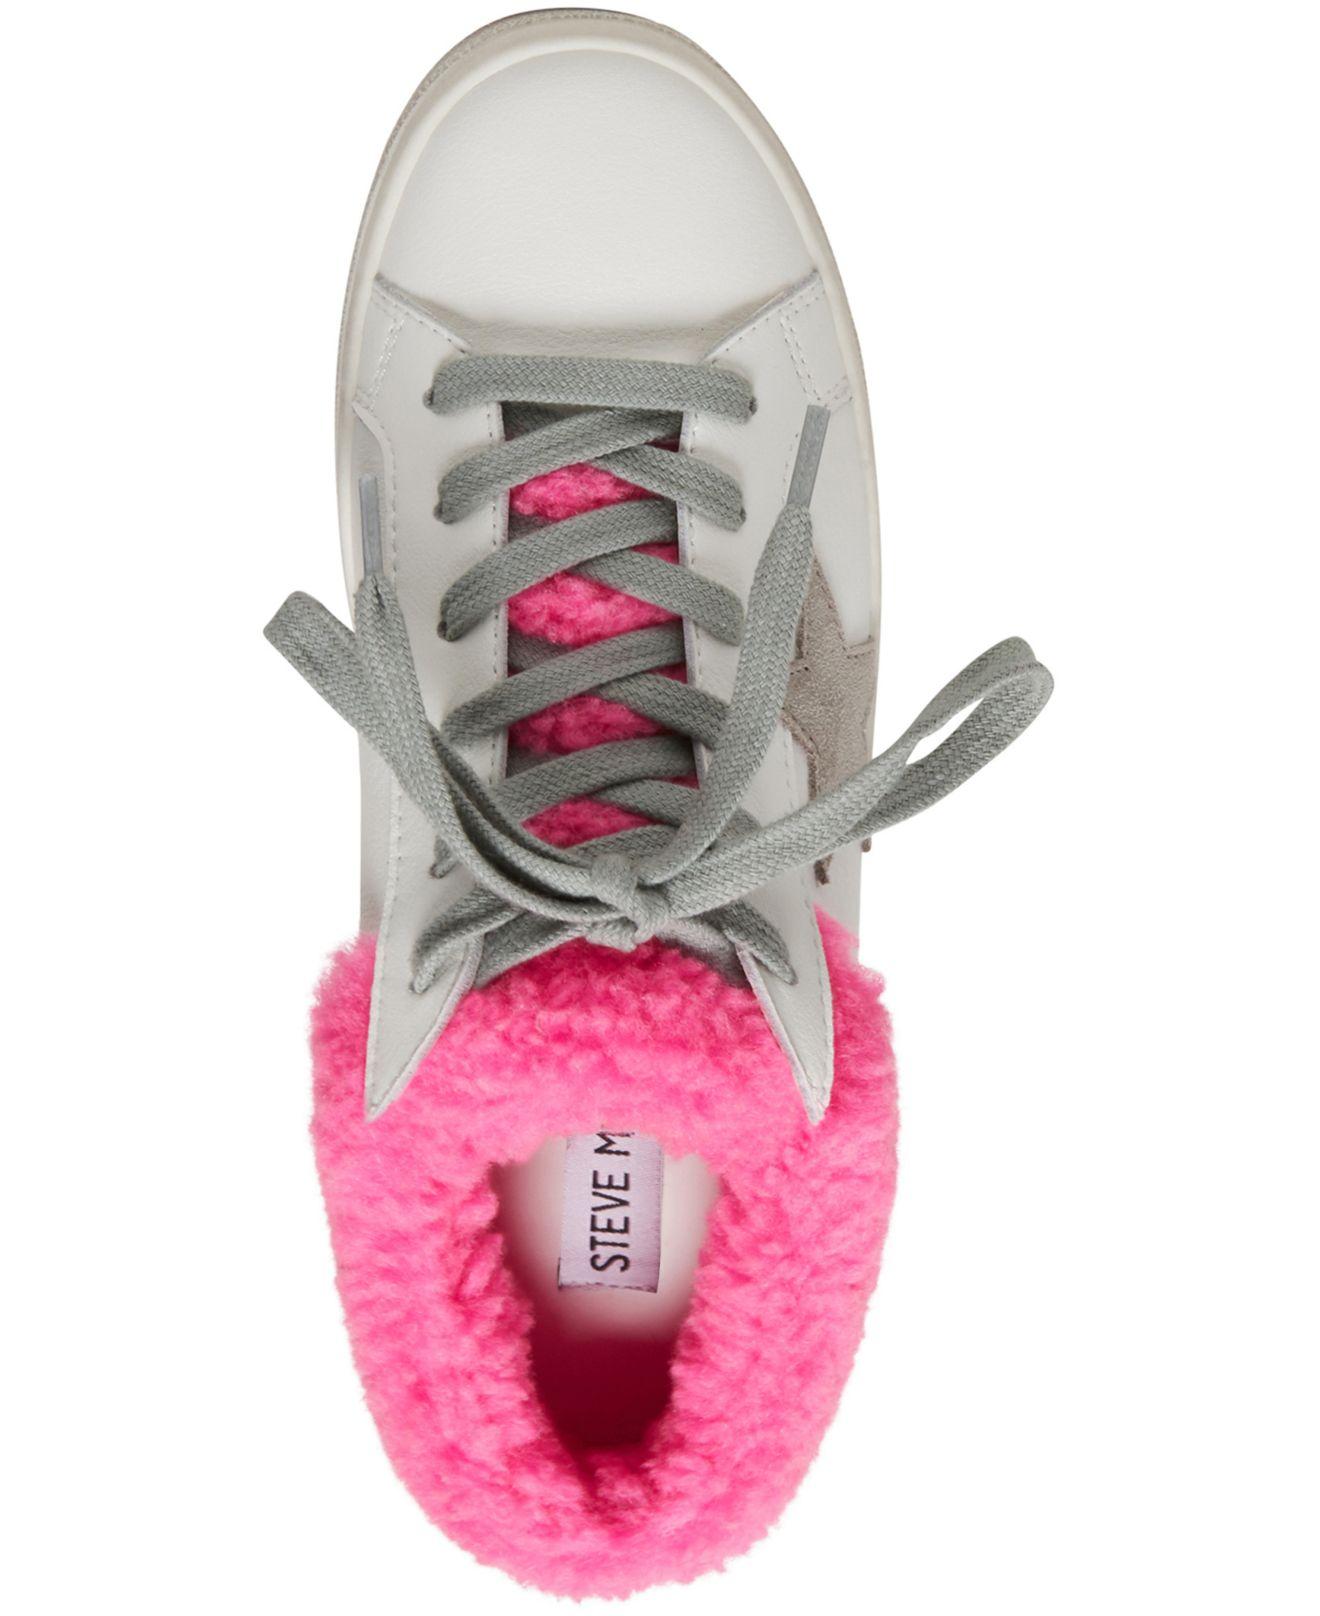 Steve Madden Polaris Faux-fur Backless Sneakers in Pink | Lyst